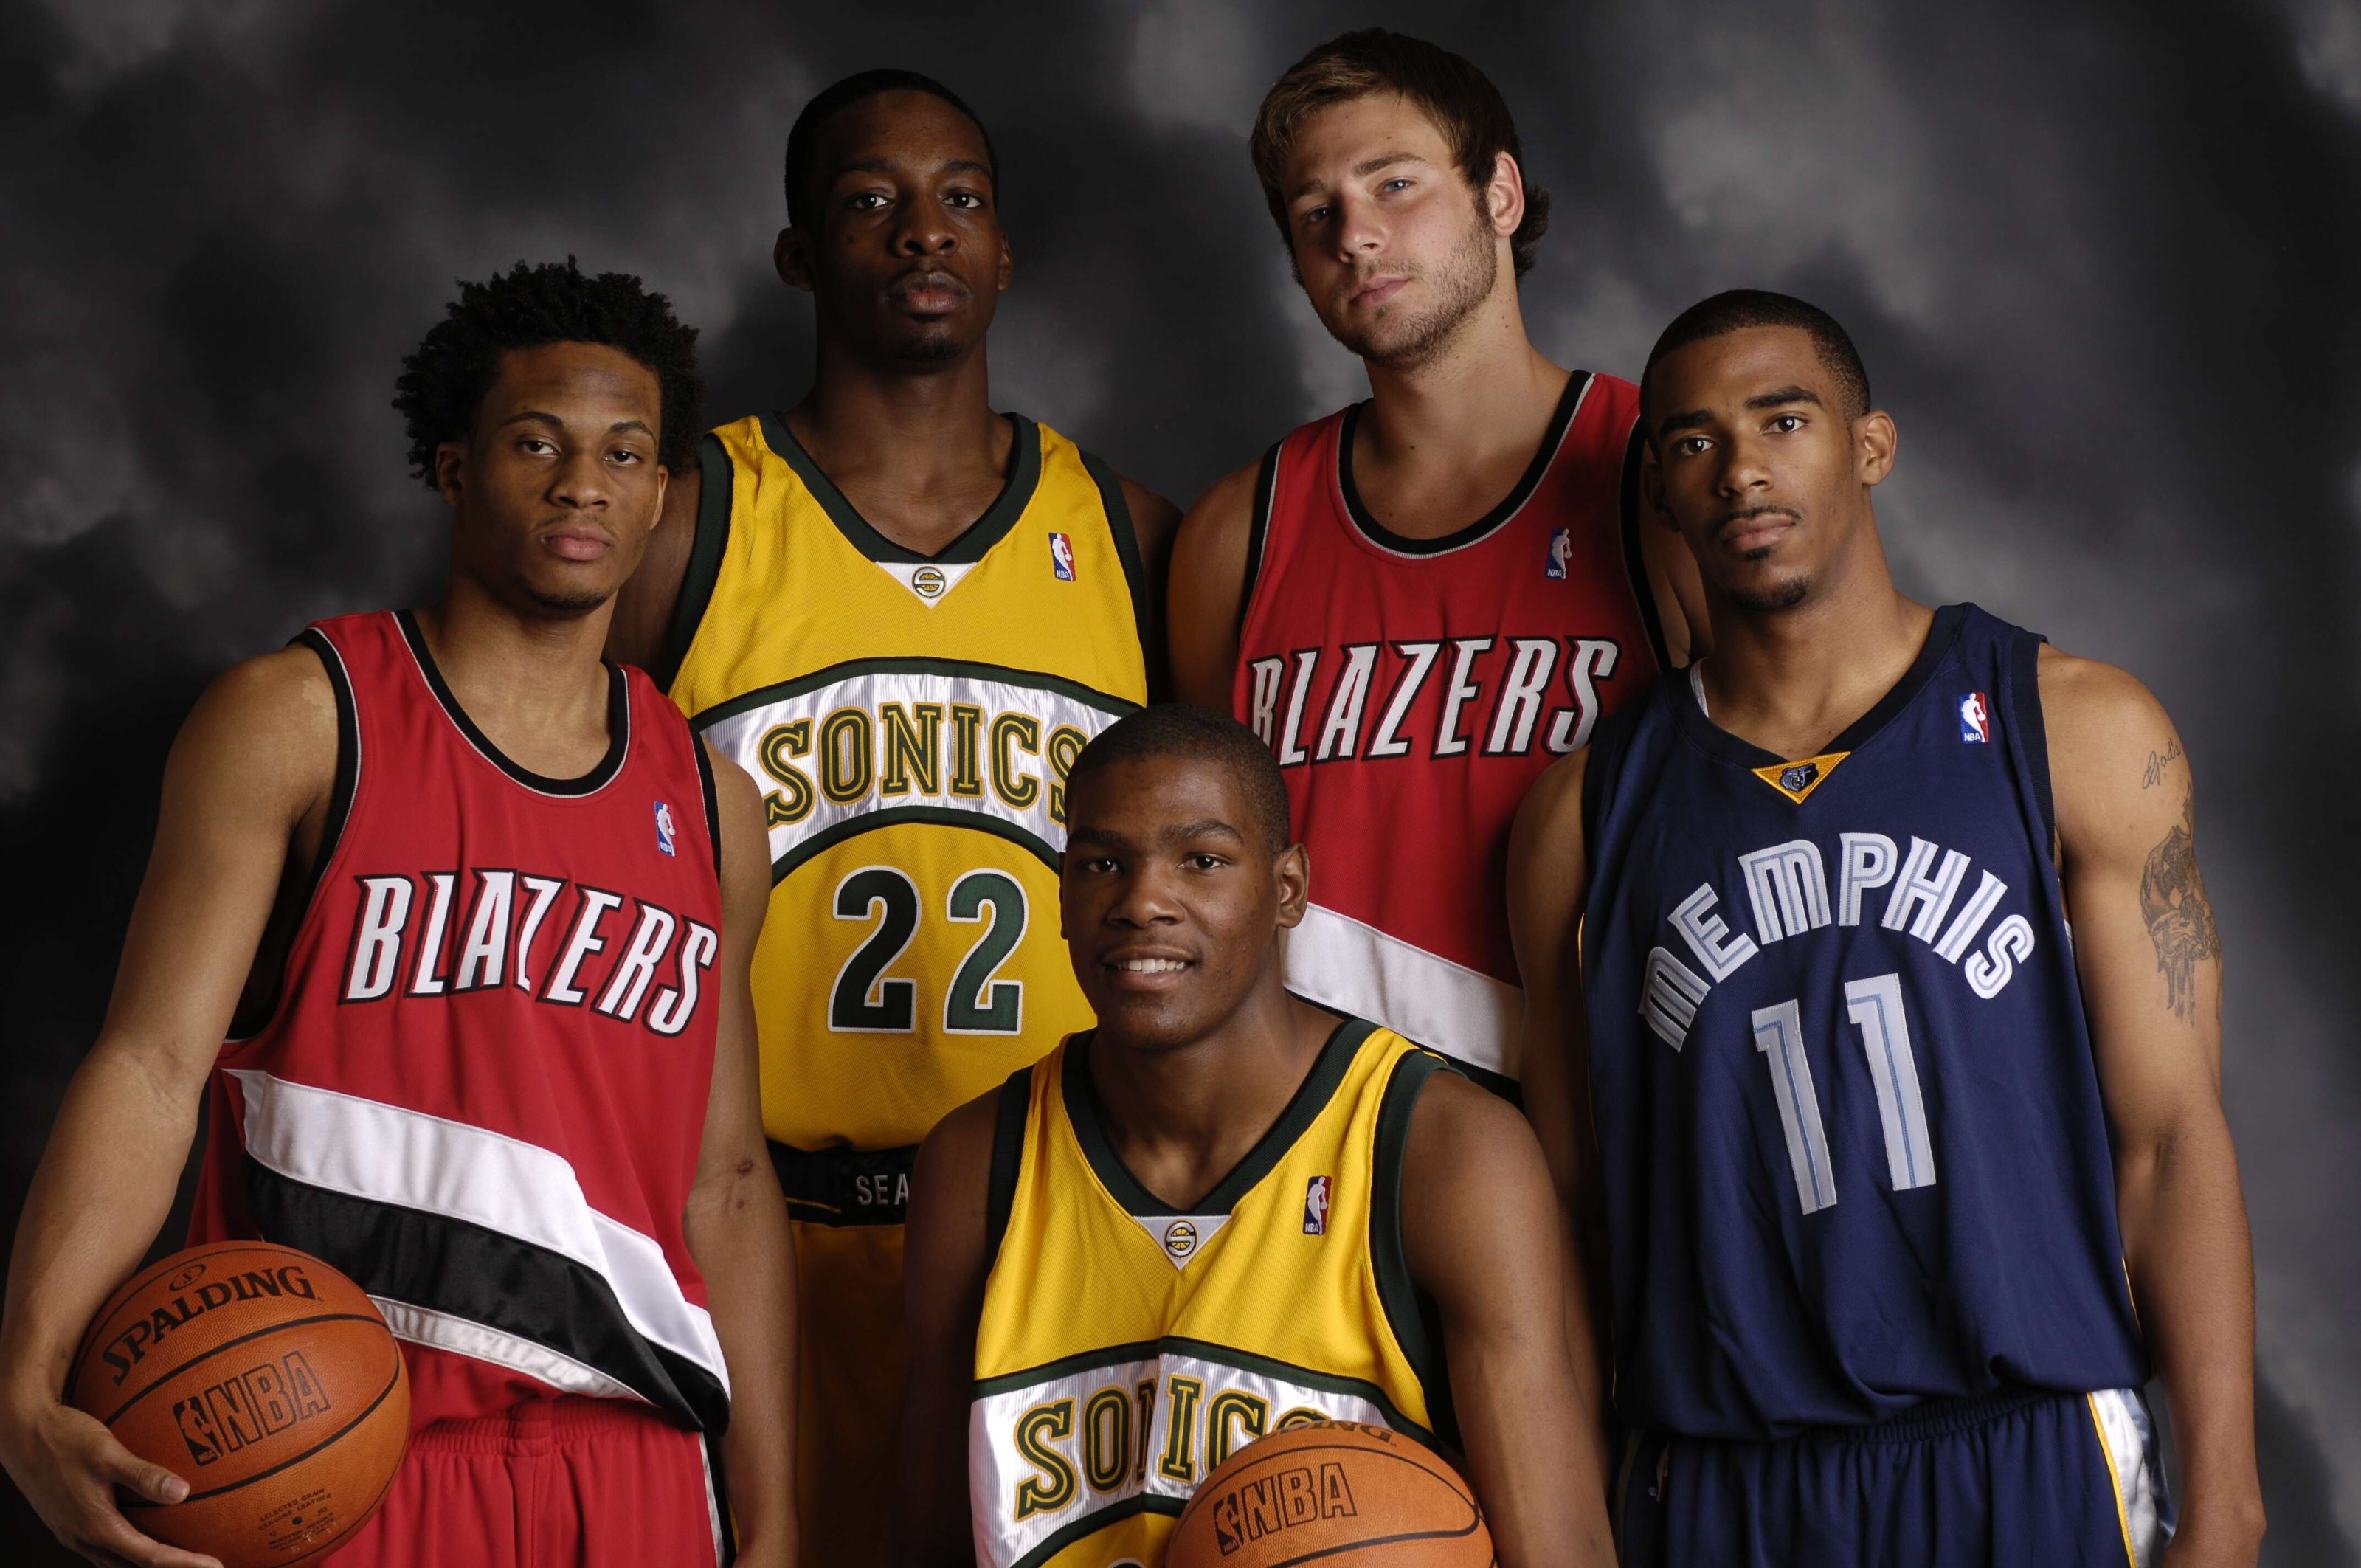 When will the Sonics return? The latest update from the NBA